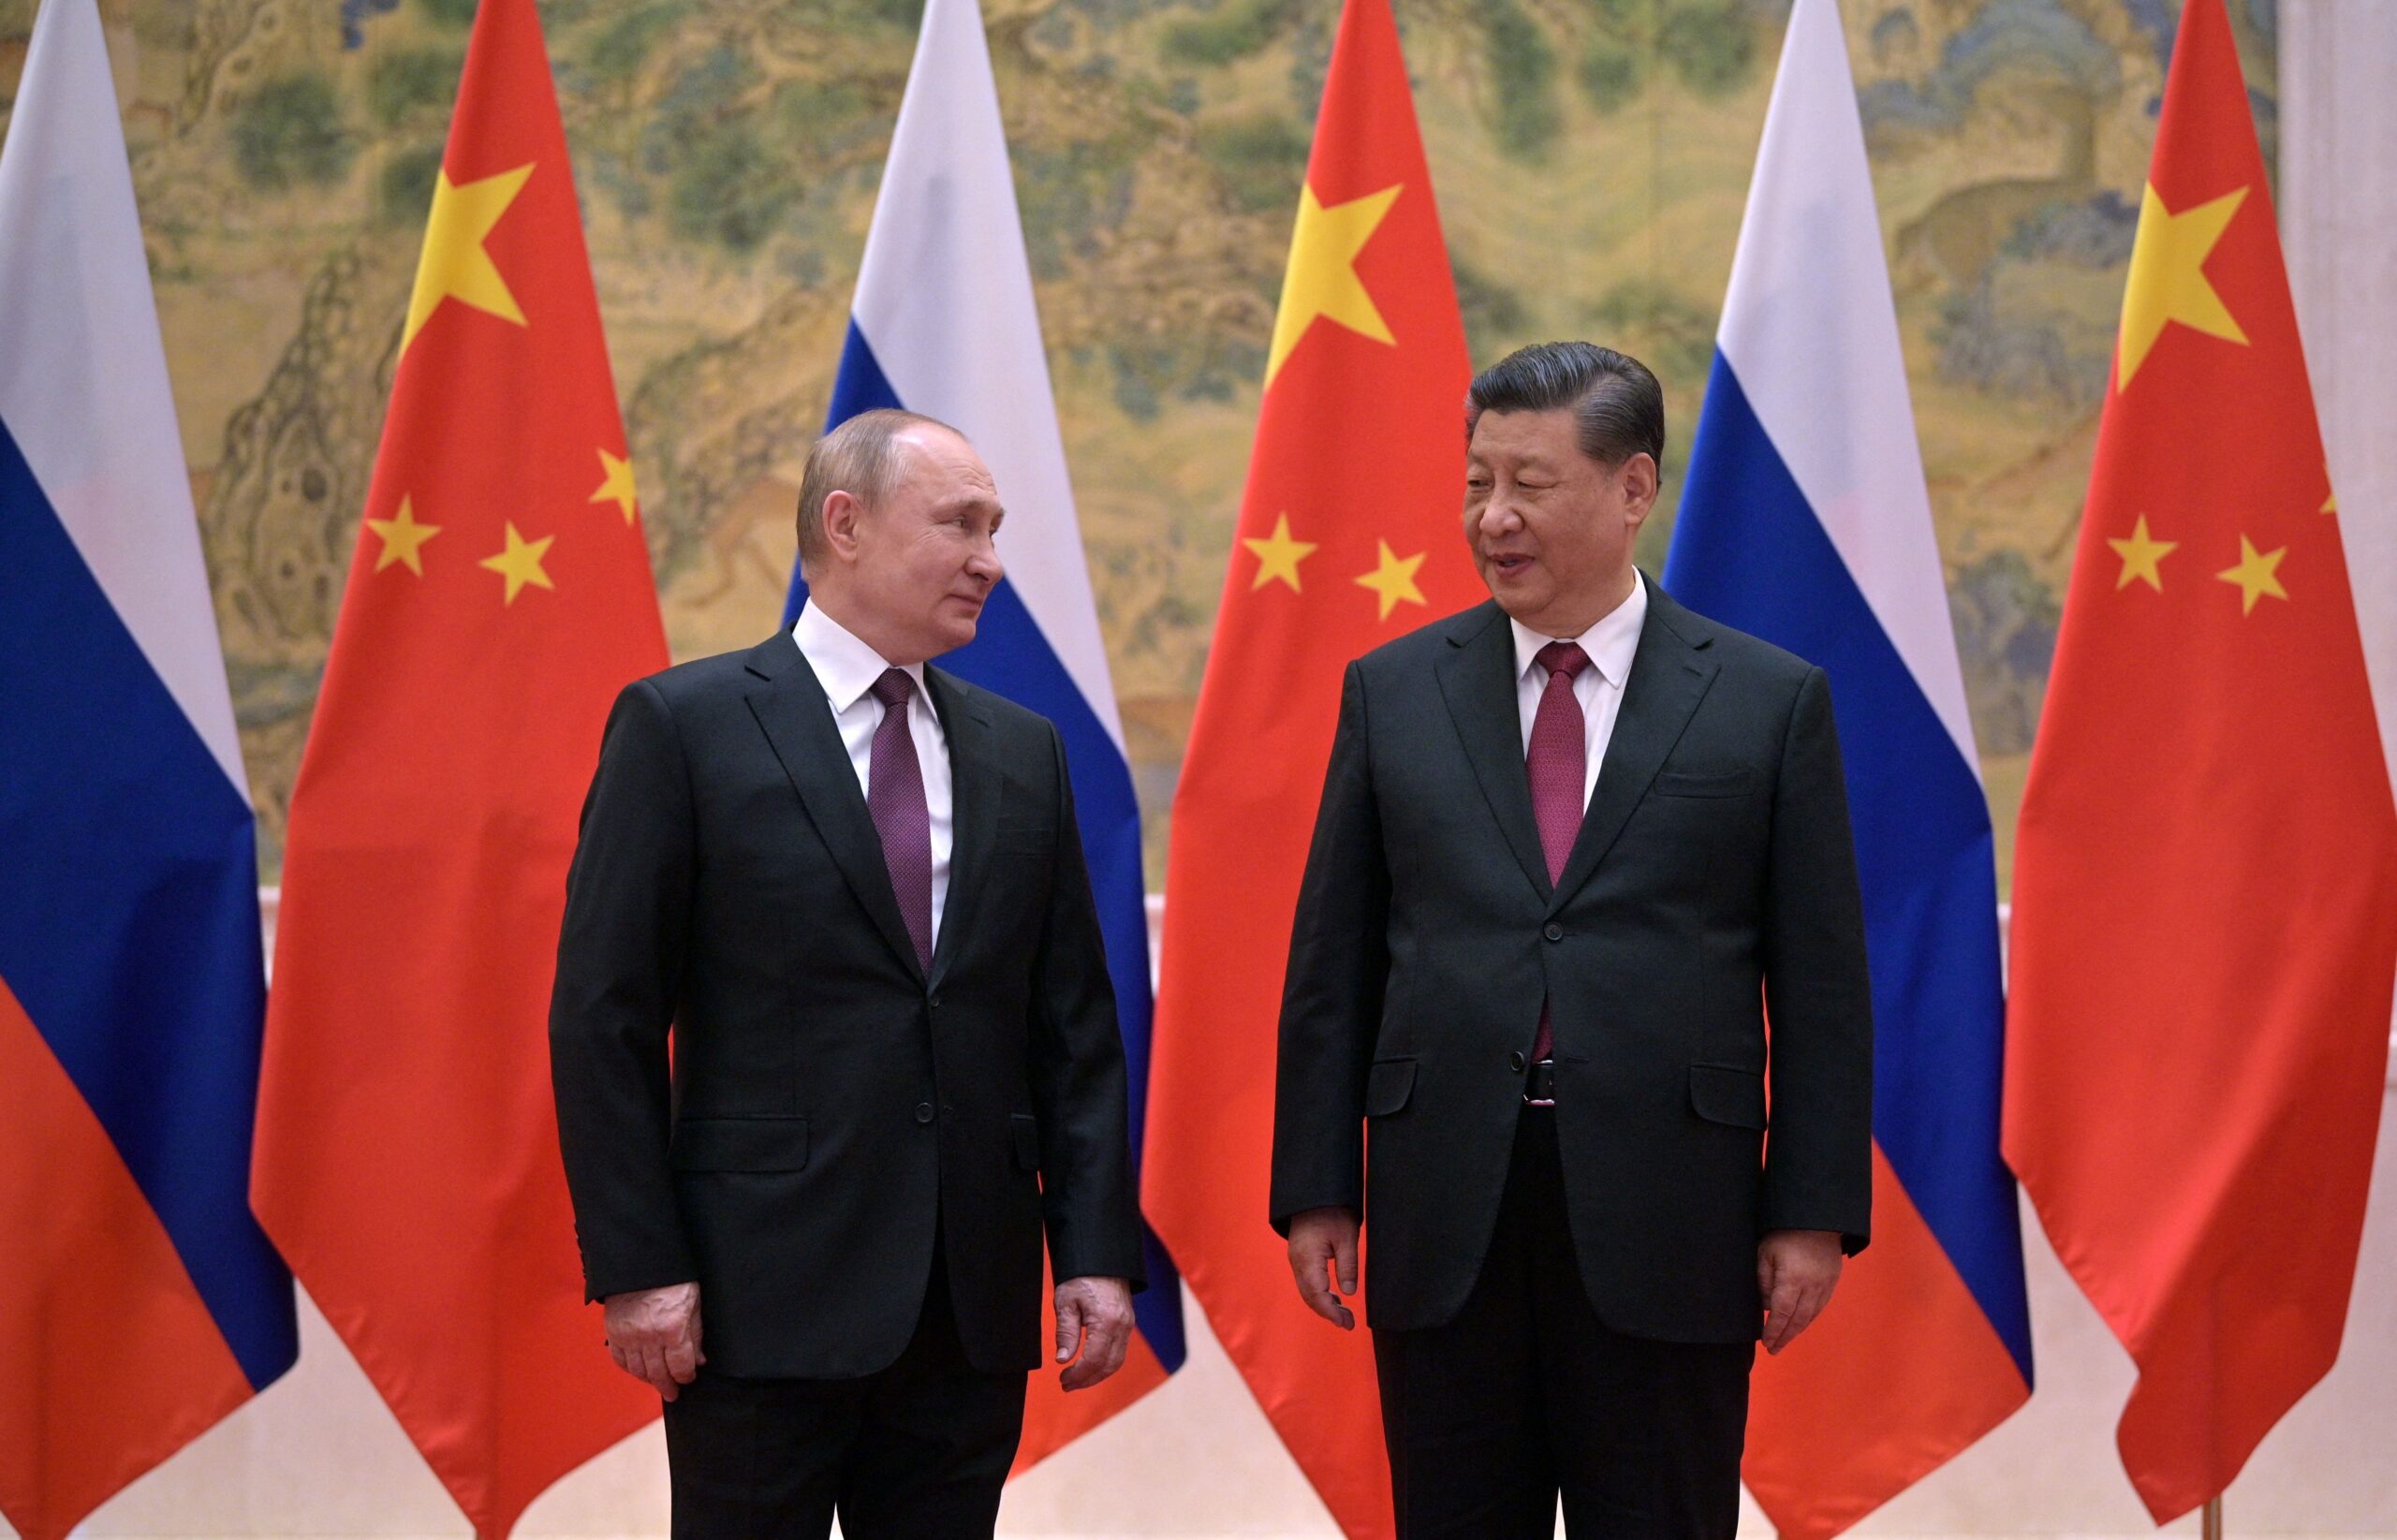 TOPSHOT - Russian President Vladimir Putin (L) and Chinese President Xi Jinping pose during their meeting in Beijing, on February 4, 2022. (Photo by Alexei Druzhinin / Sputnik / AFP) (Photo by ALEXEI DRUZHININ/Sputnik/AFP via Getty Images)